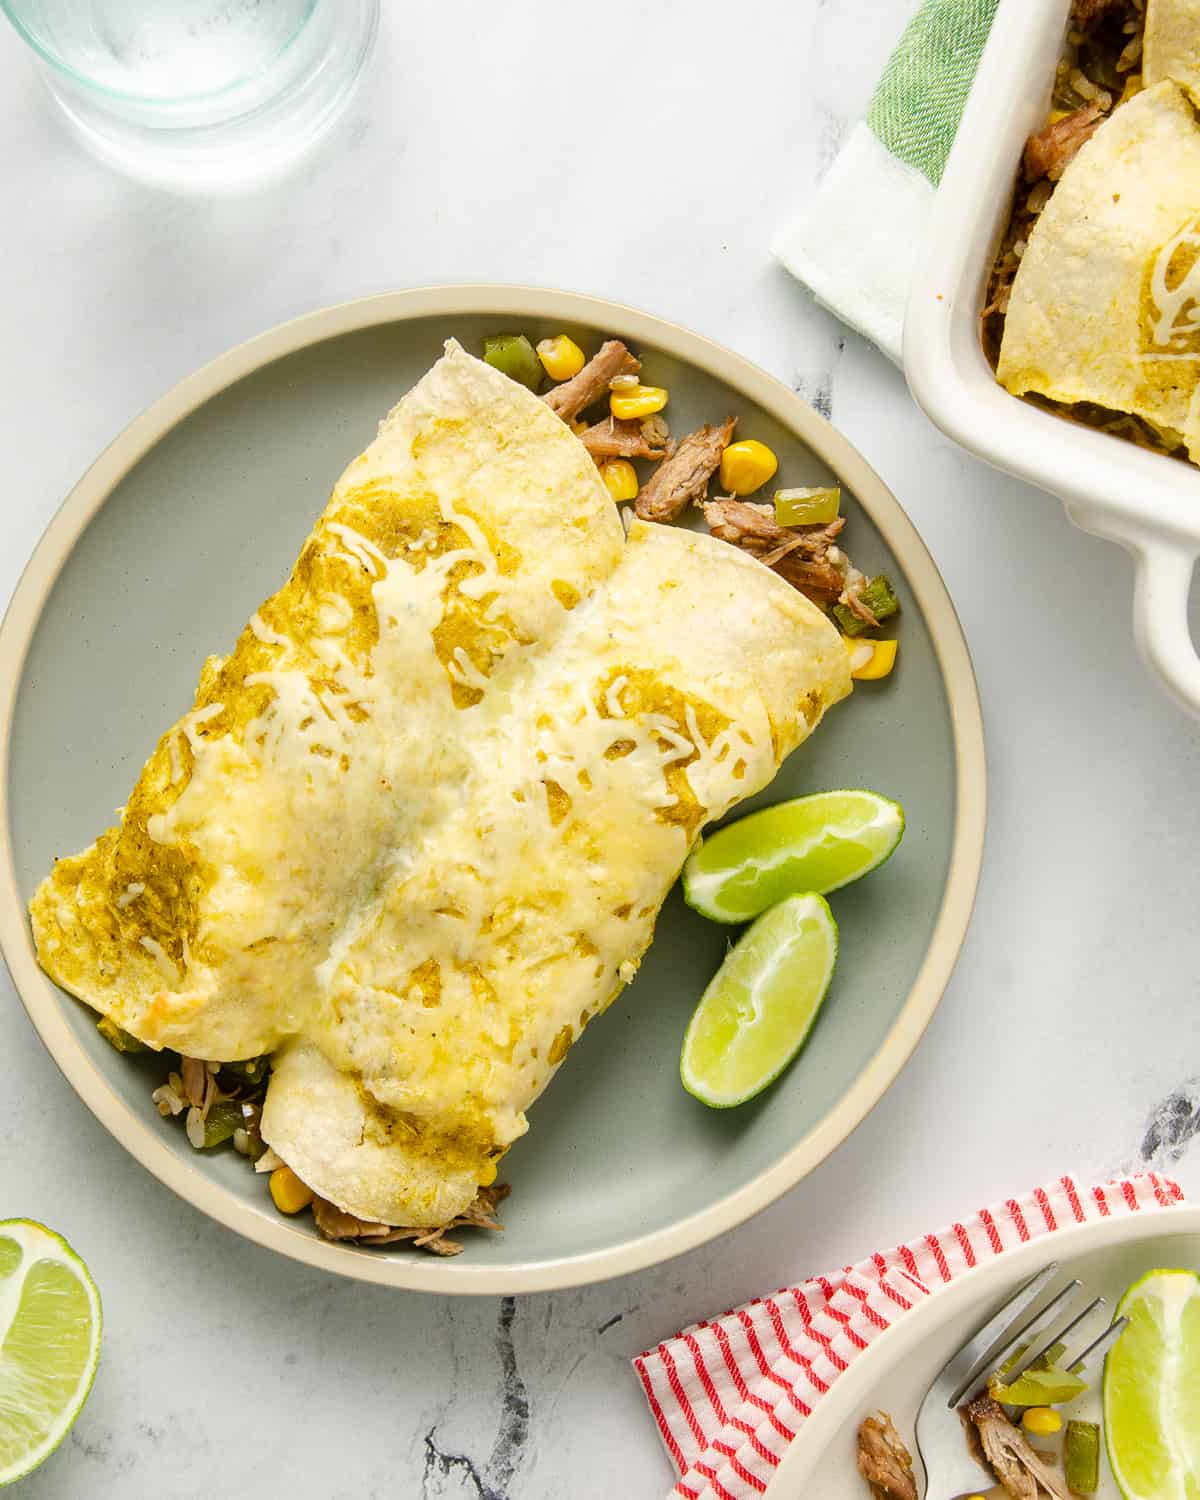 Two enchiladas on a plate topped with cheese.